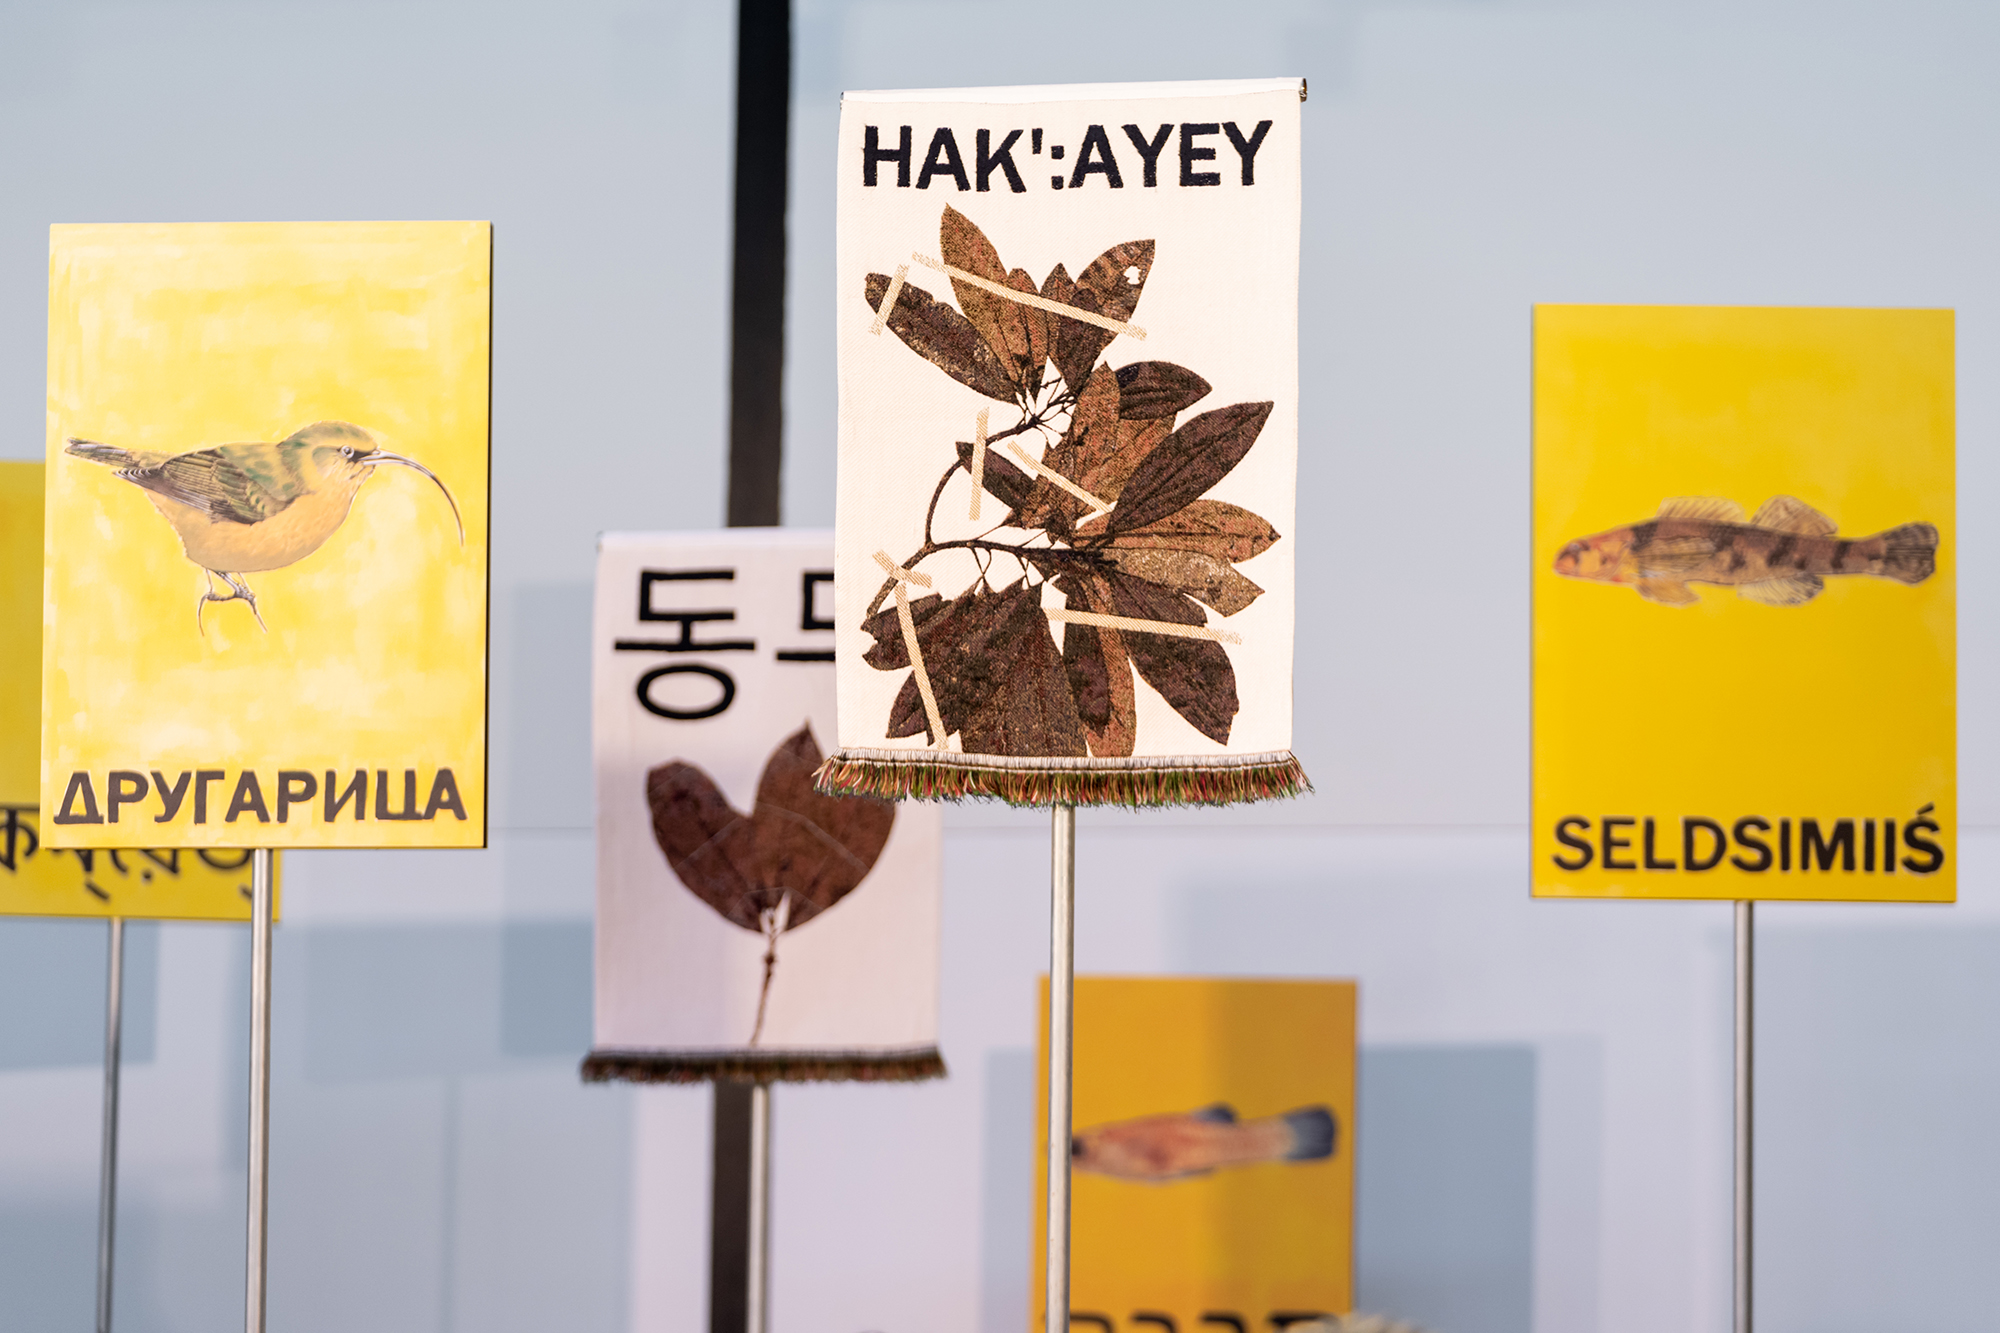 A display of yellow and white banners featuring extinct animals and flora in various languages